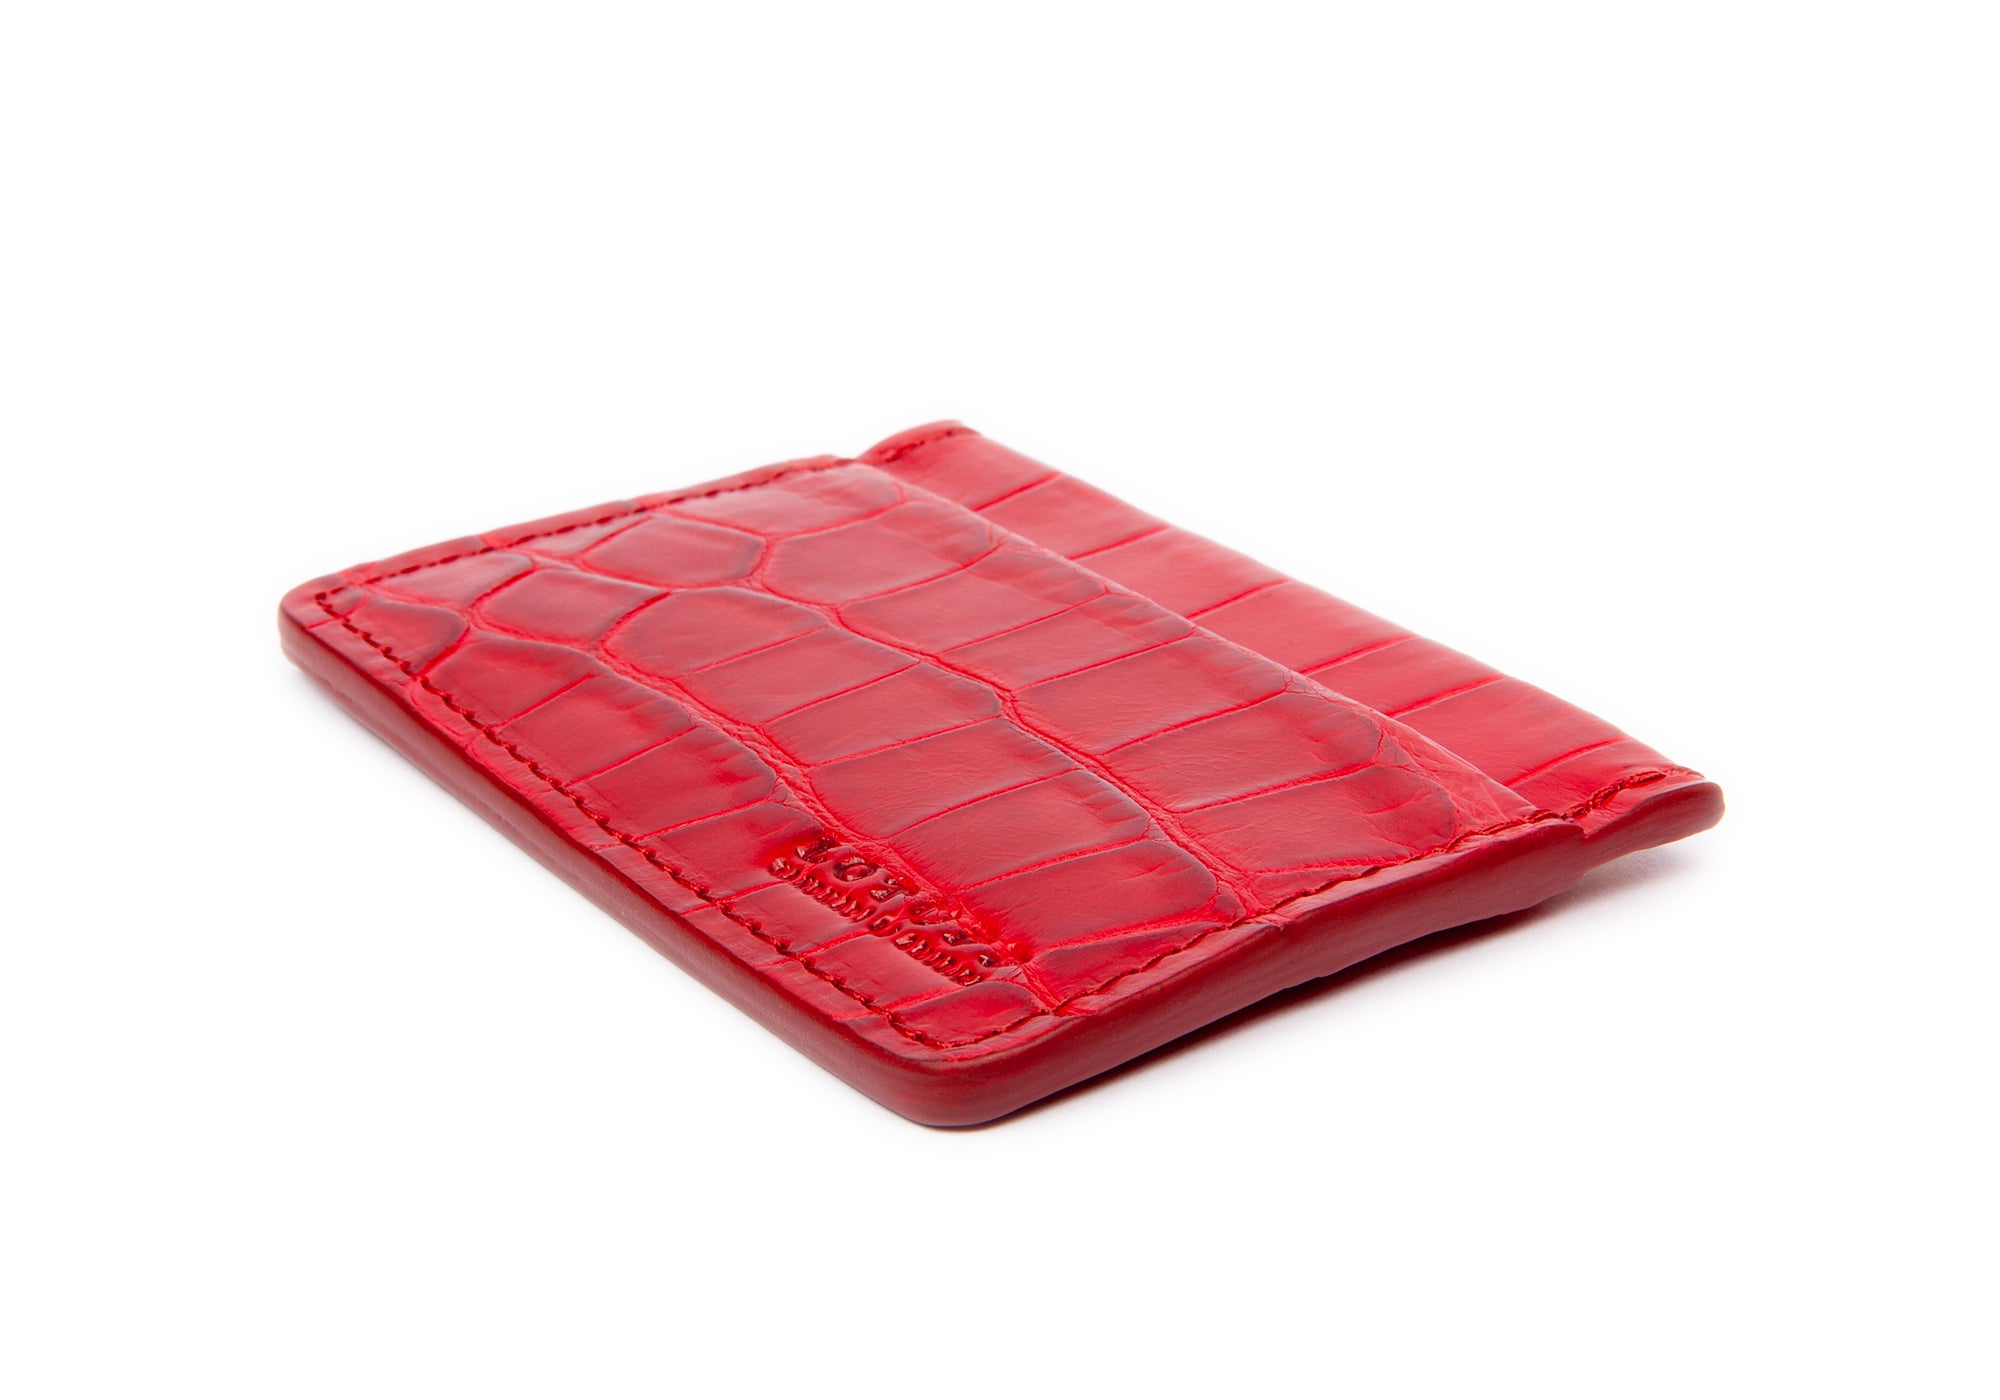 Women's Small Leather Card Case Wallet with Flap - Croco Embossed Red –  COLDFIRE